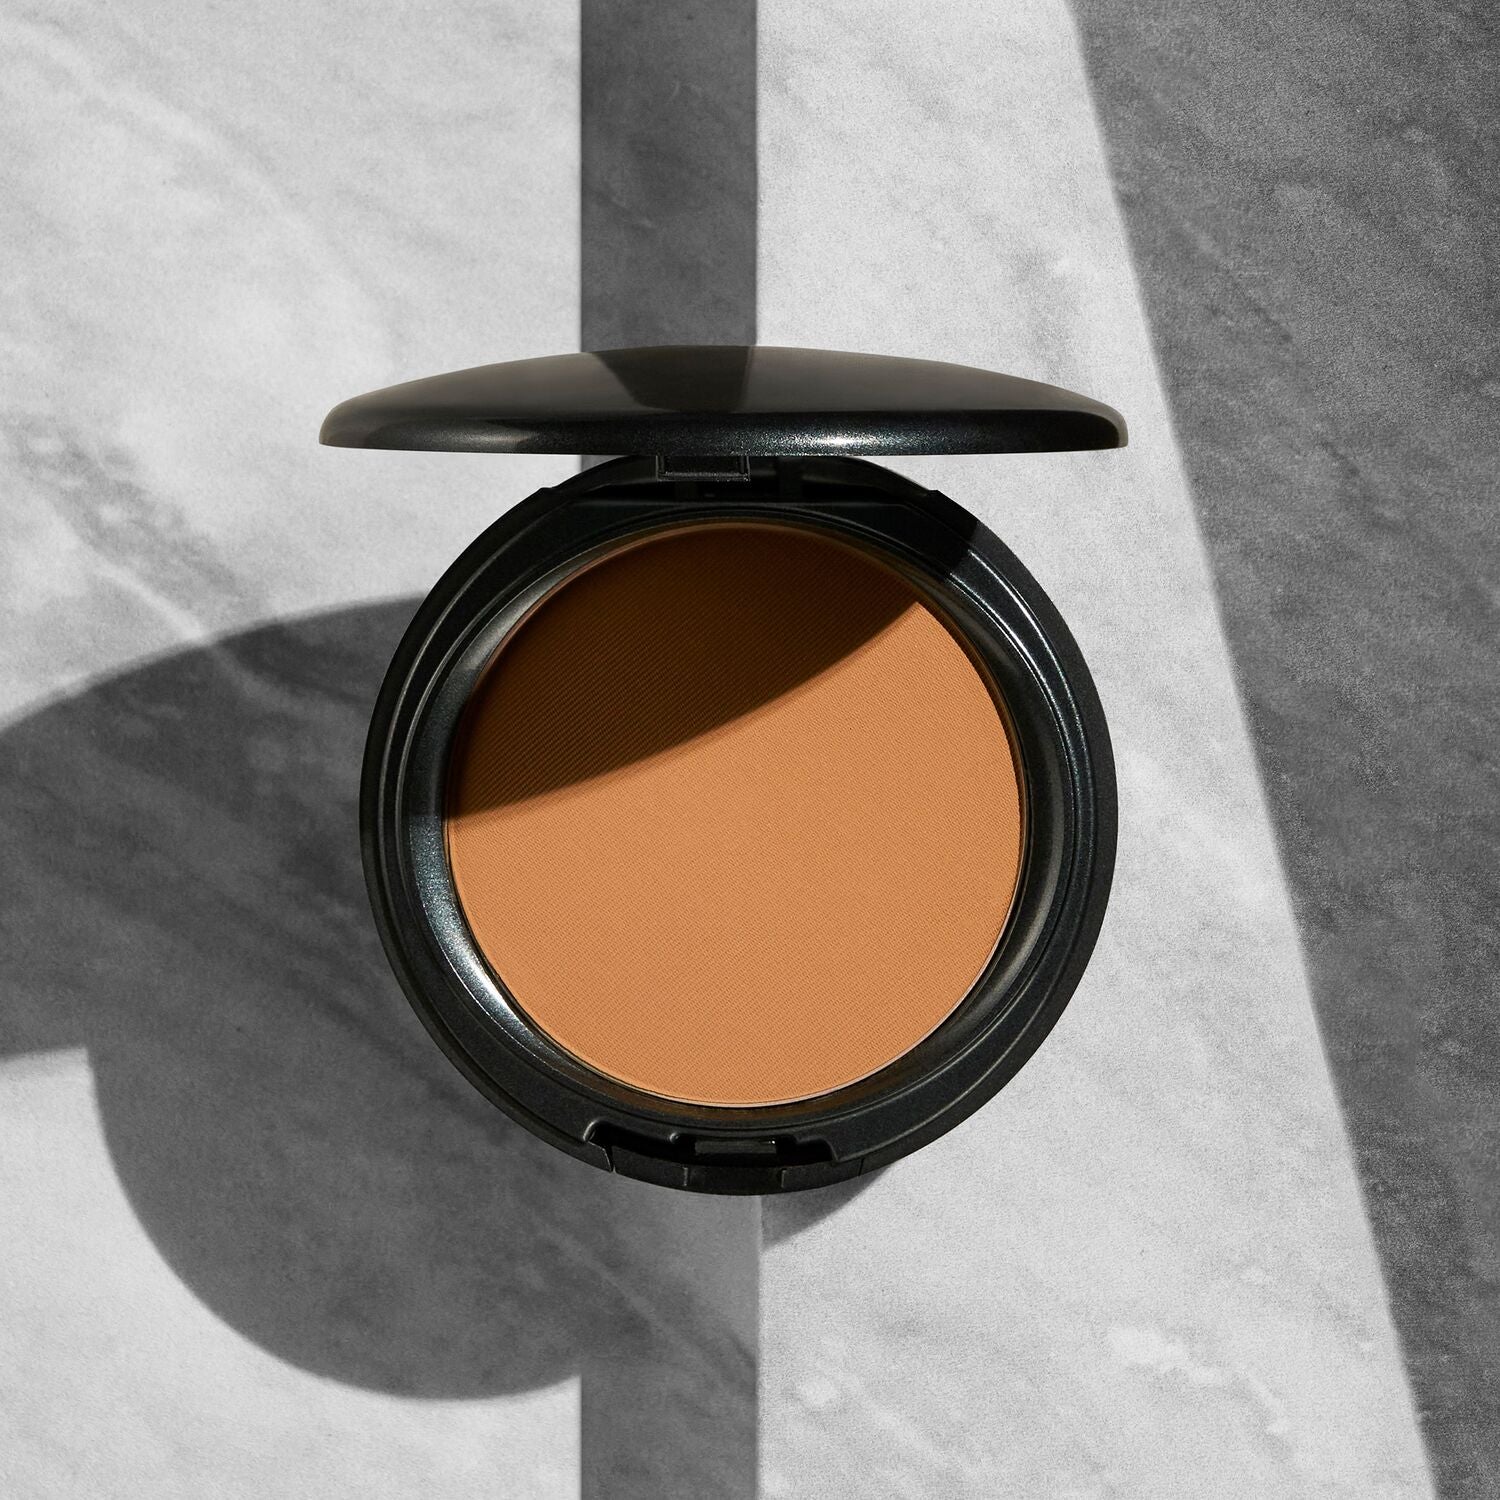 Coverfx Pressed Mineral Foundation in shade T2